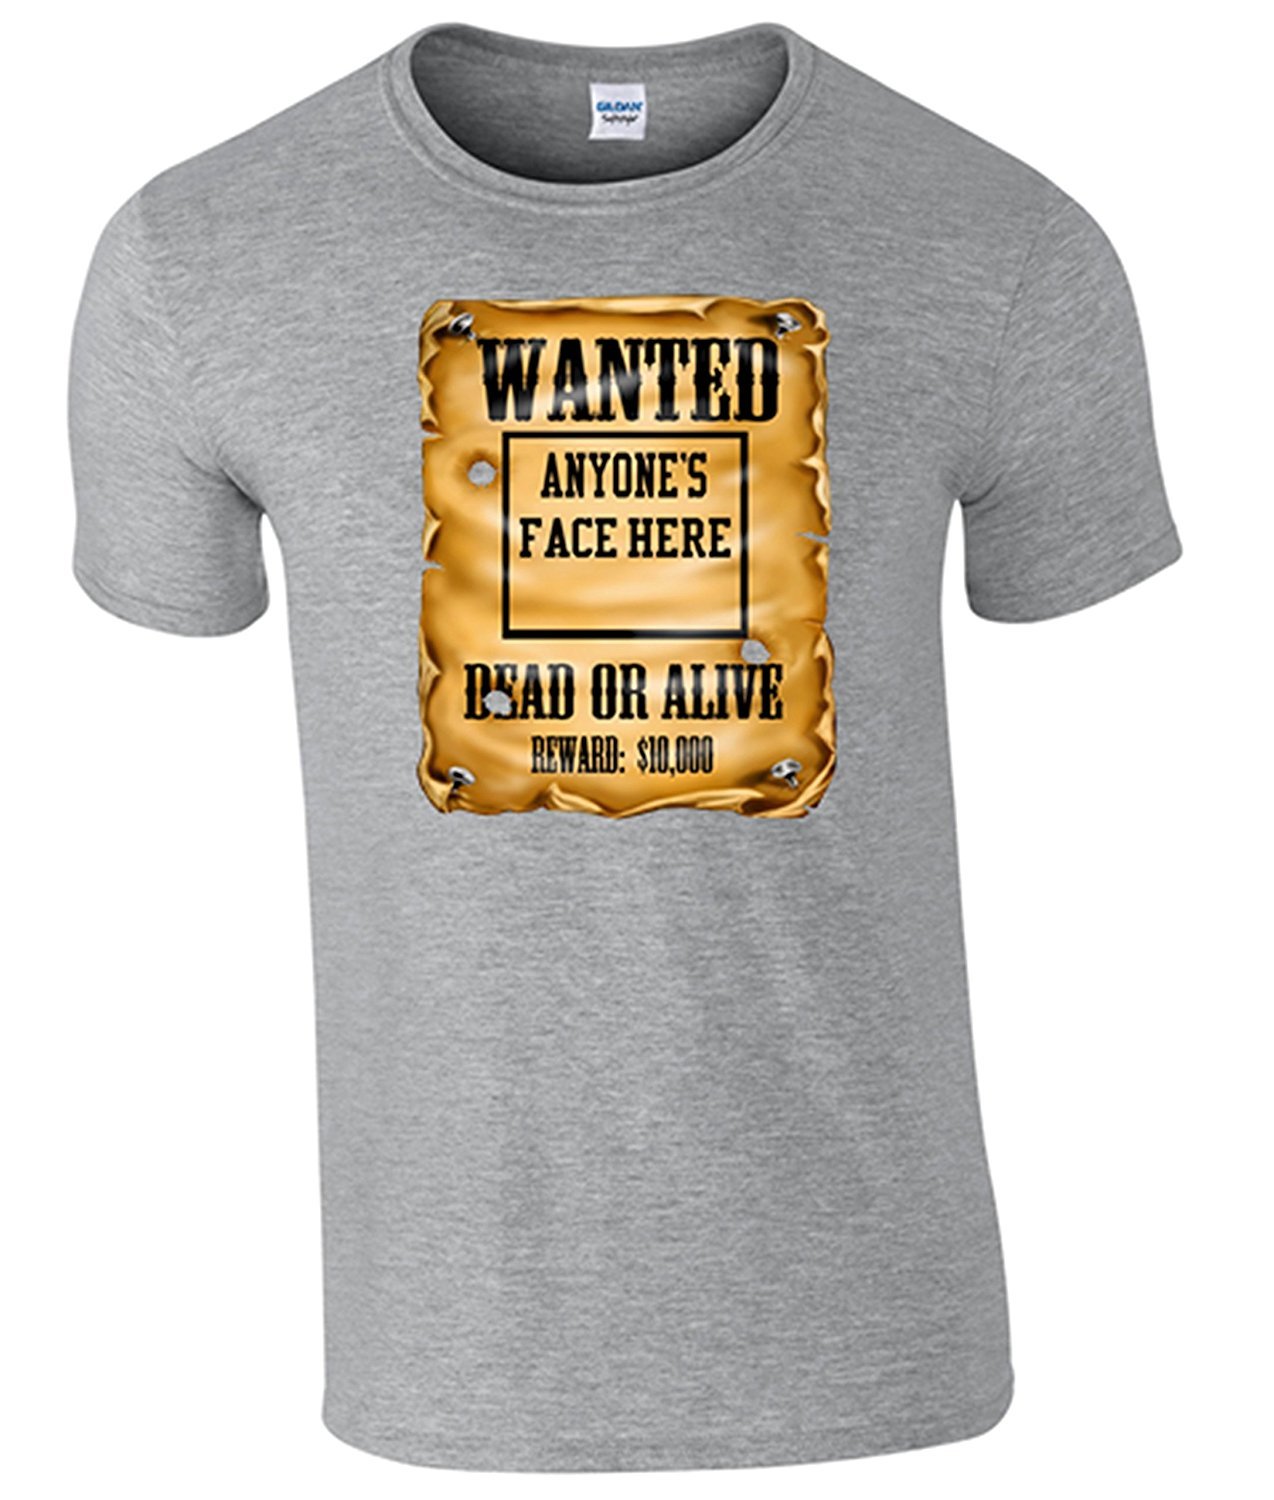 Bear Essentials Clothing. Wanted Dead Or Alive T/Shirt (S, Sand) - Army 1157 Kit  Veterans Owned Business